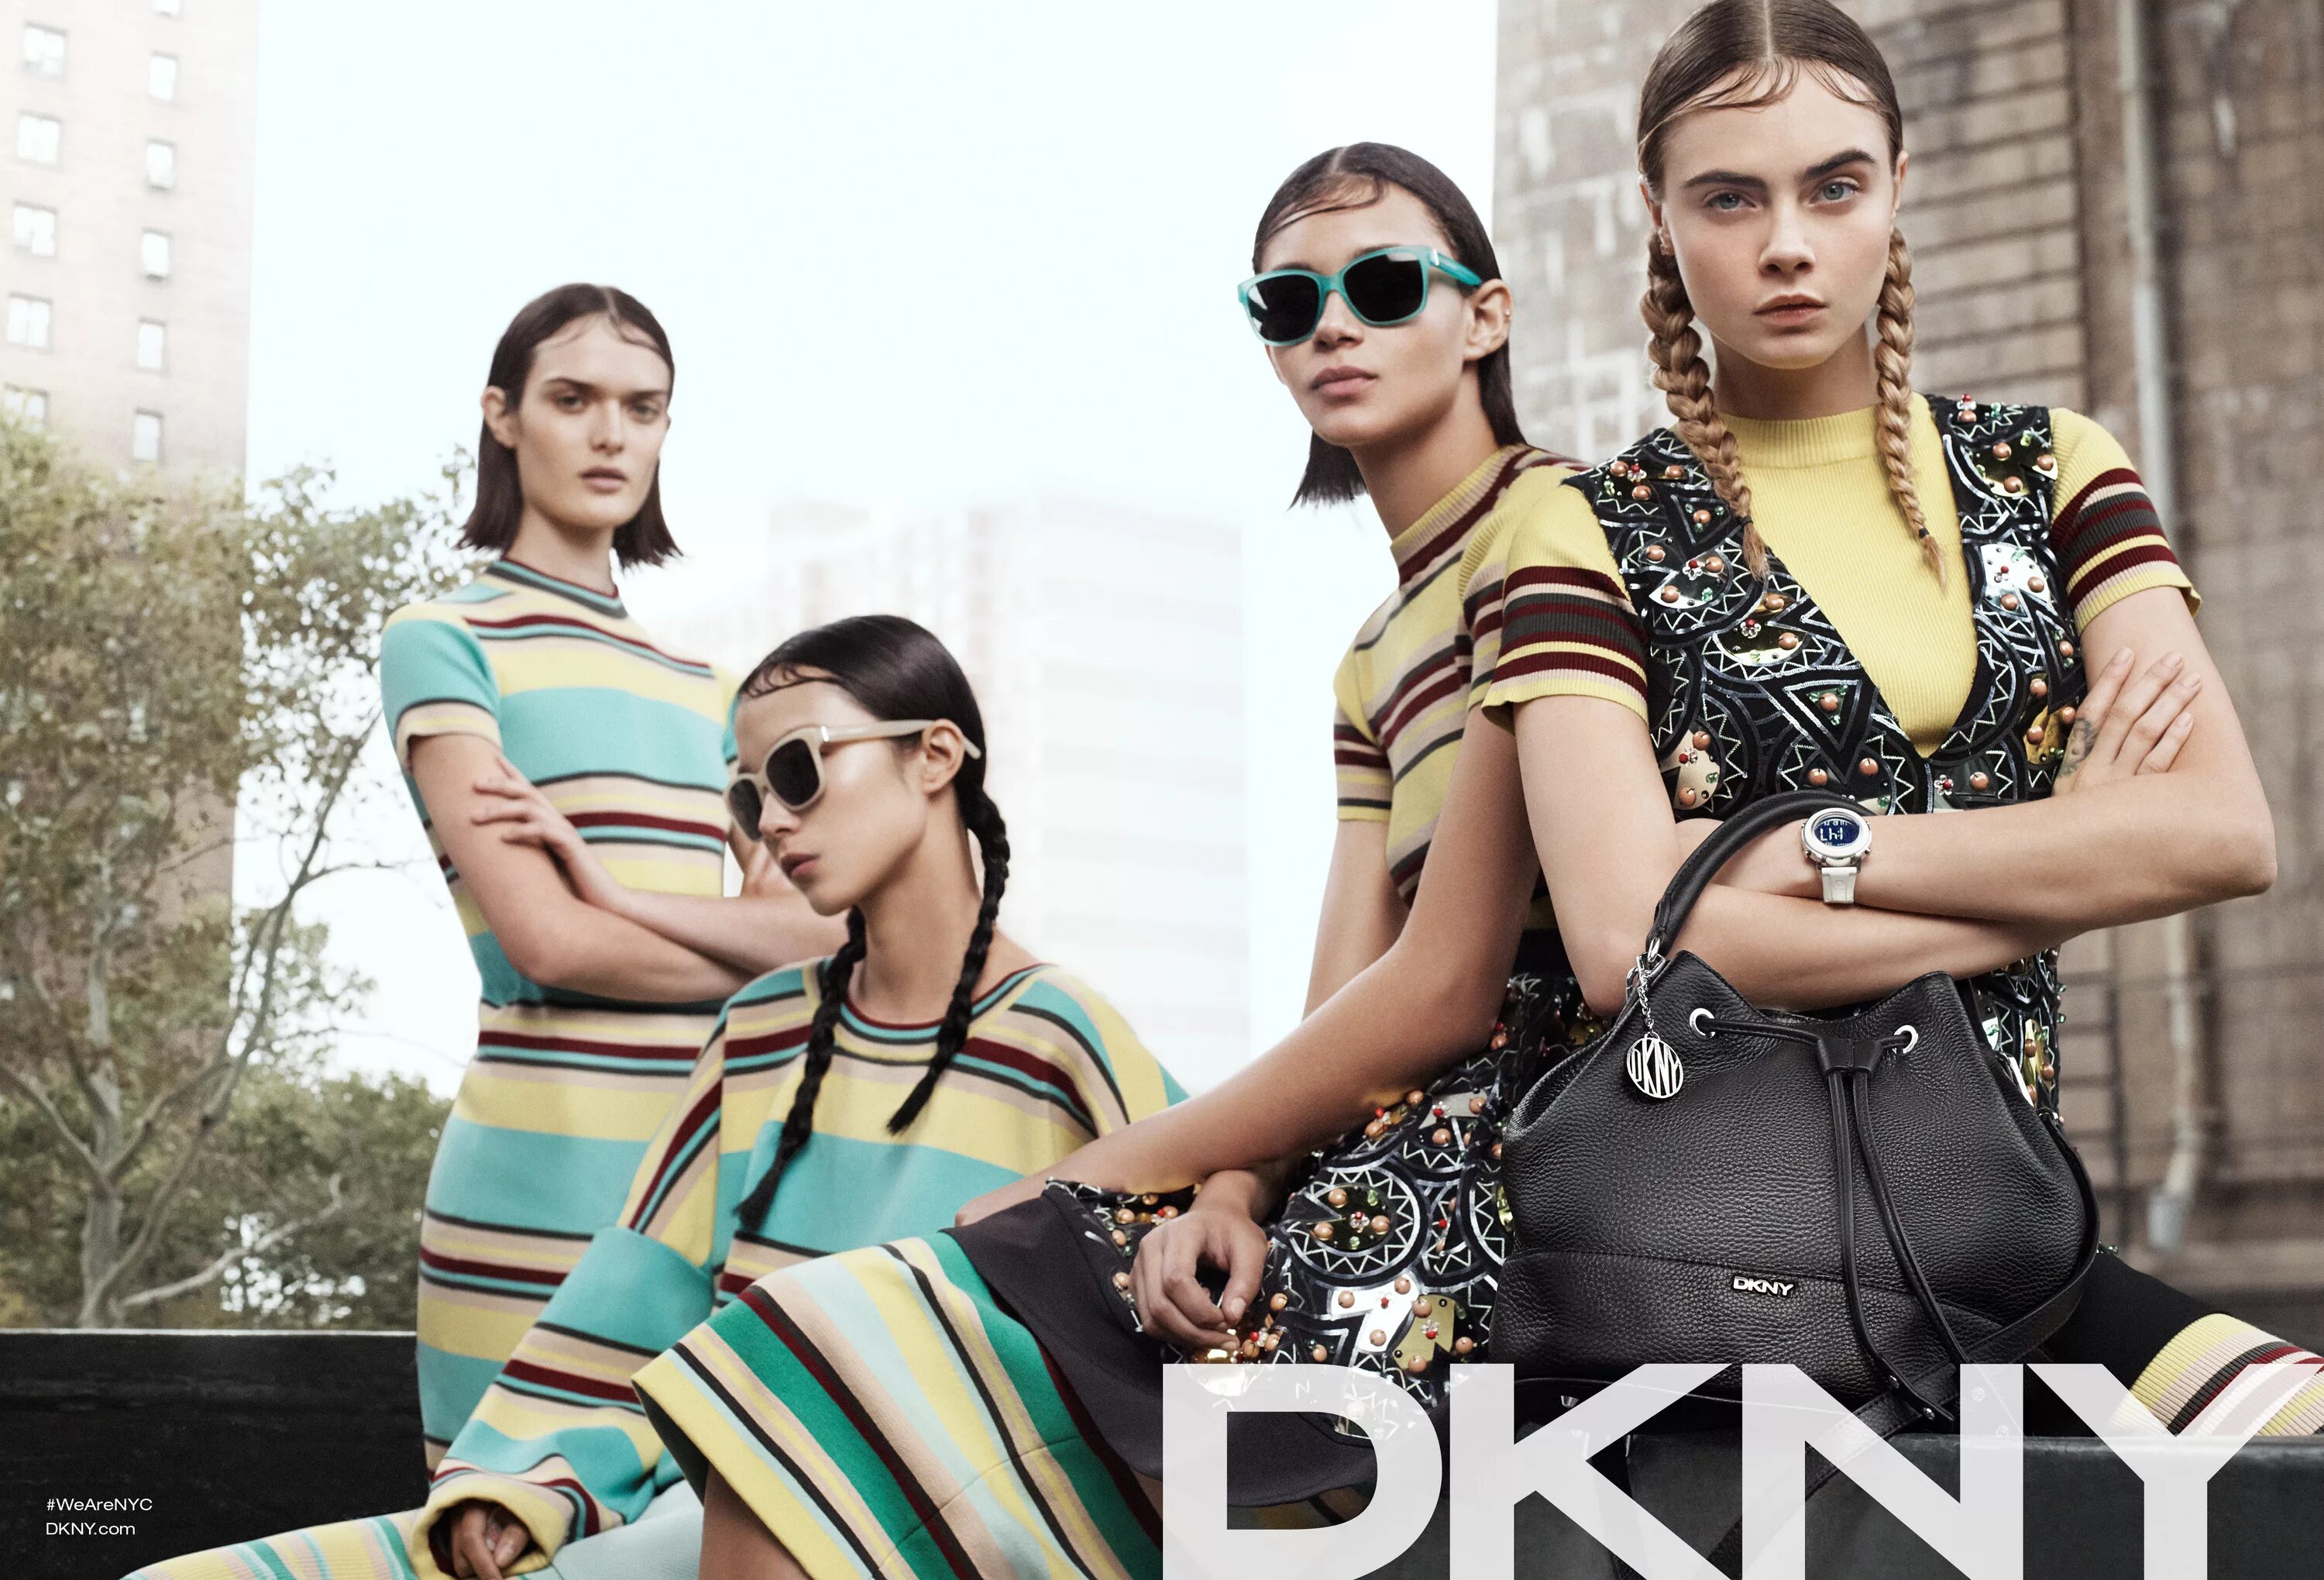 DKNY campaign 2022. DKNY Summer 2015. DKNY 2015 Bags. New great campaign